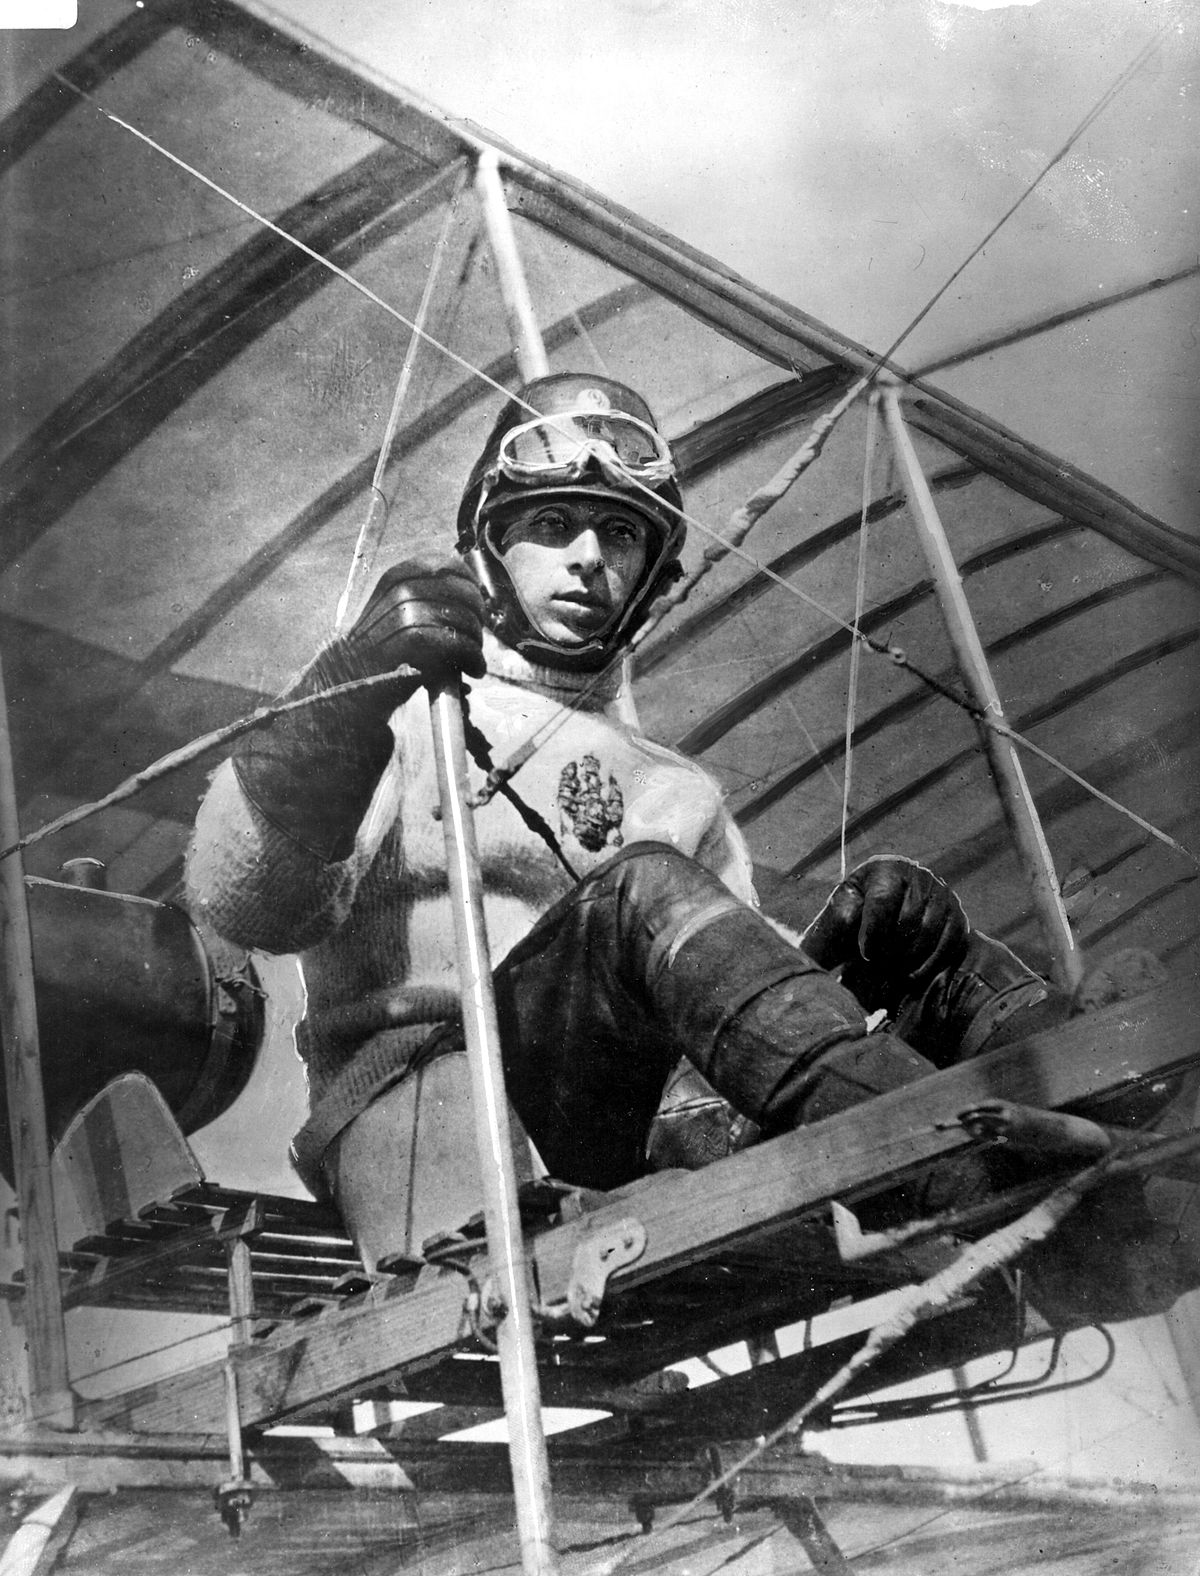 Major Alexander Procofieff de Seversky sits at the controls of an early aircraft circa 1914